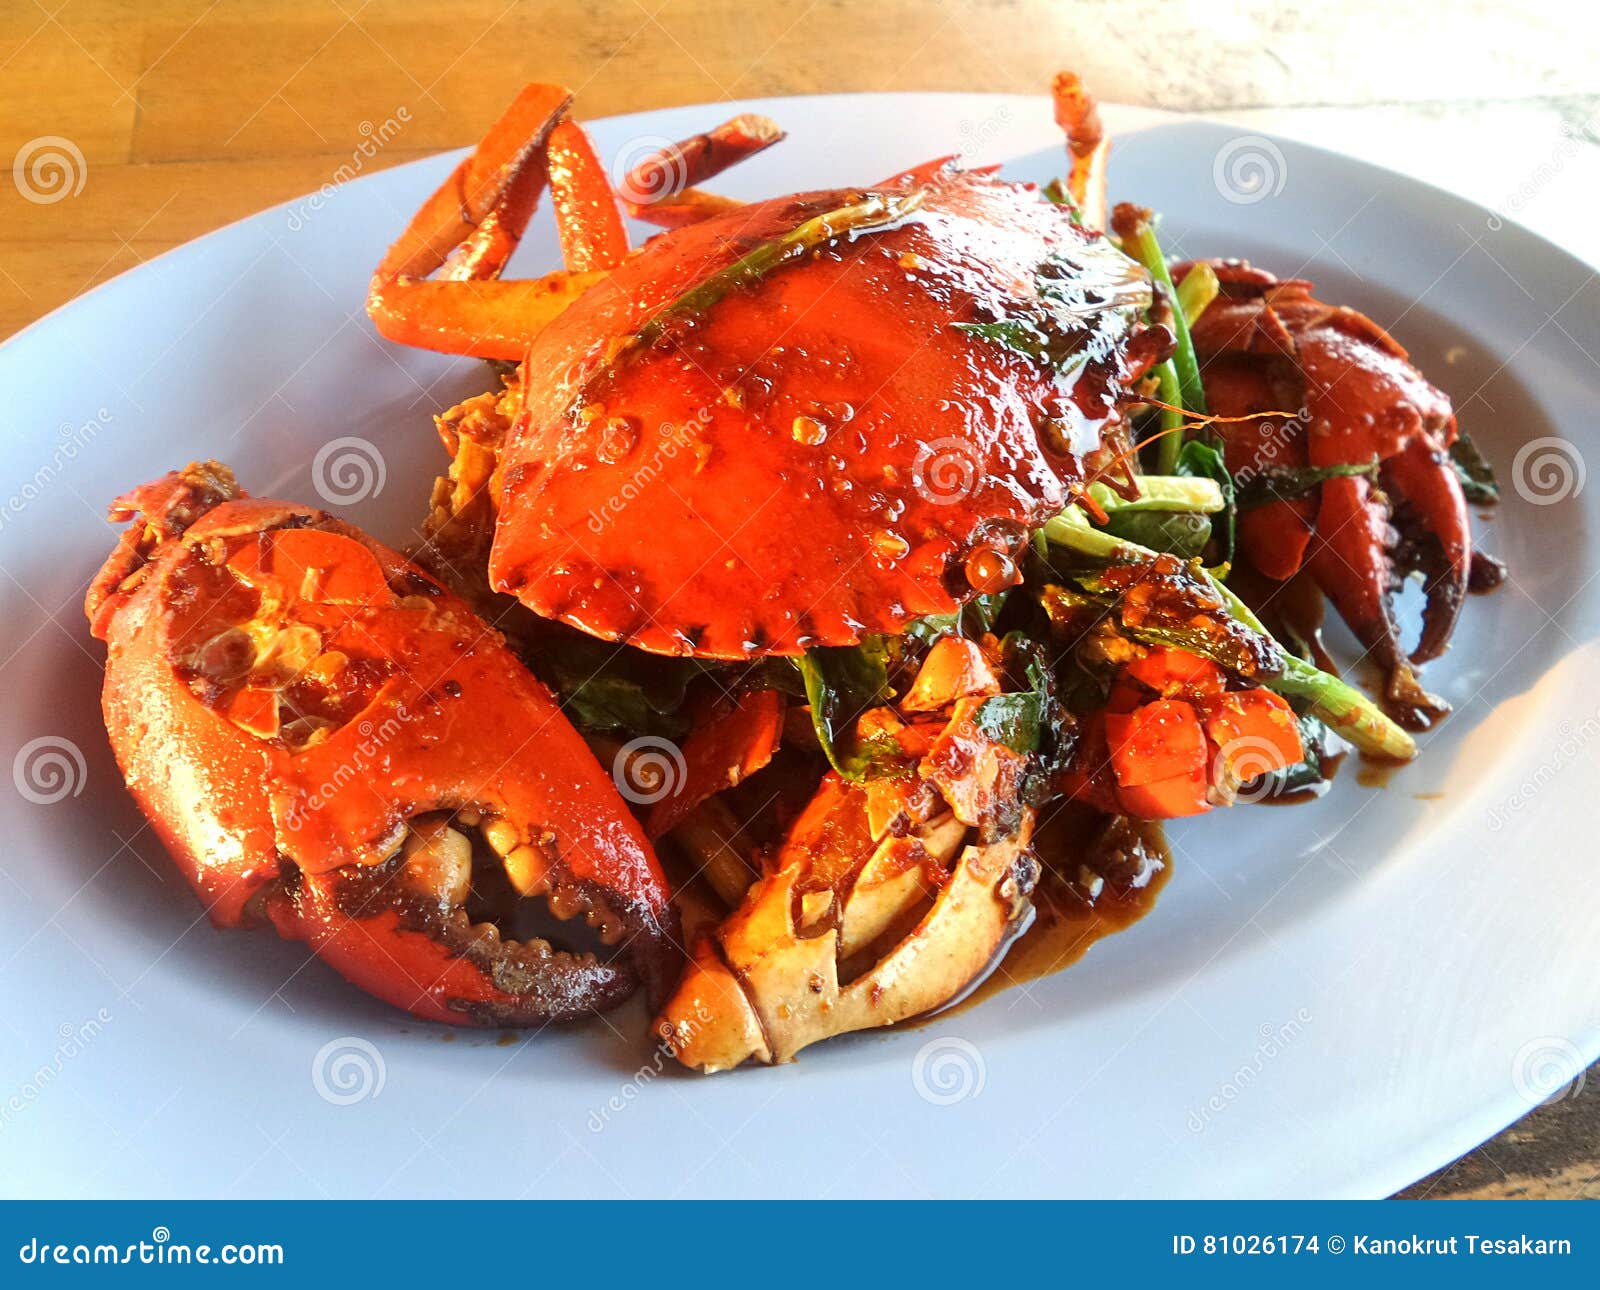 Stir Fried Crab With Black Pepper Sauce Stock Photo Image Of Fried My